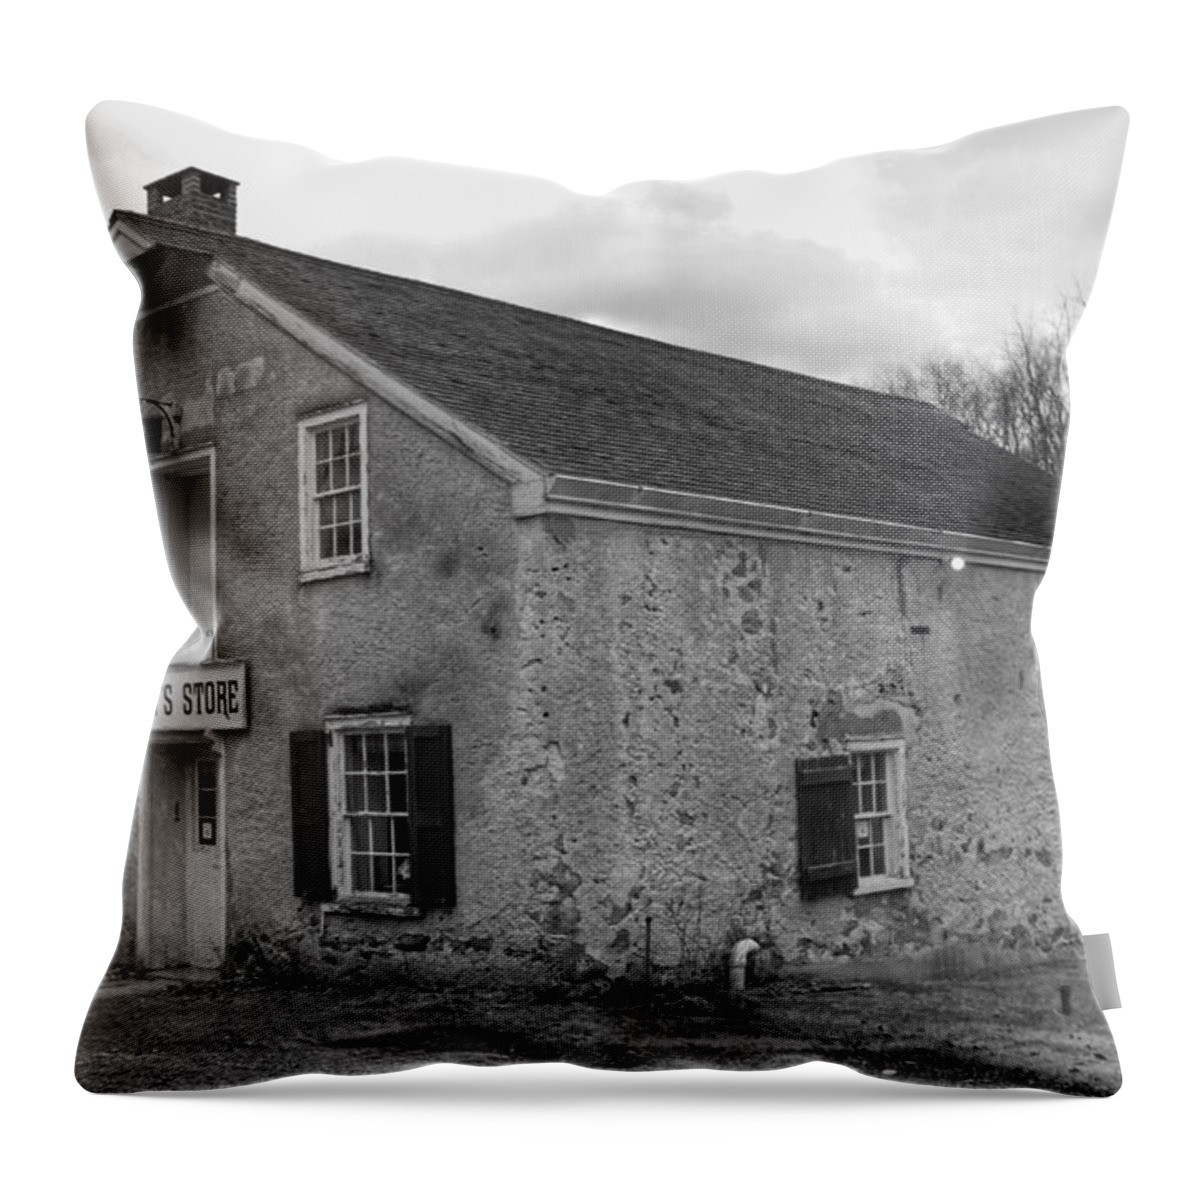 Waterloo Village Throw Pillow featuring the photograph Smith's Store - Waterloo Village by Christopher Lotito